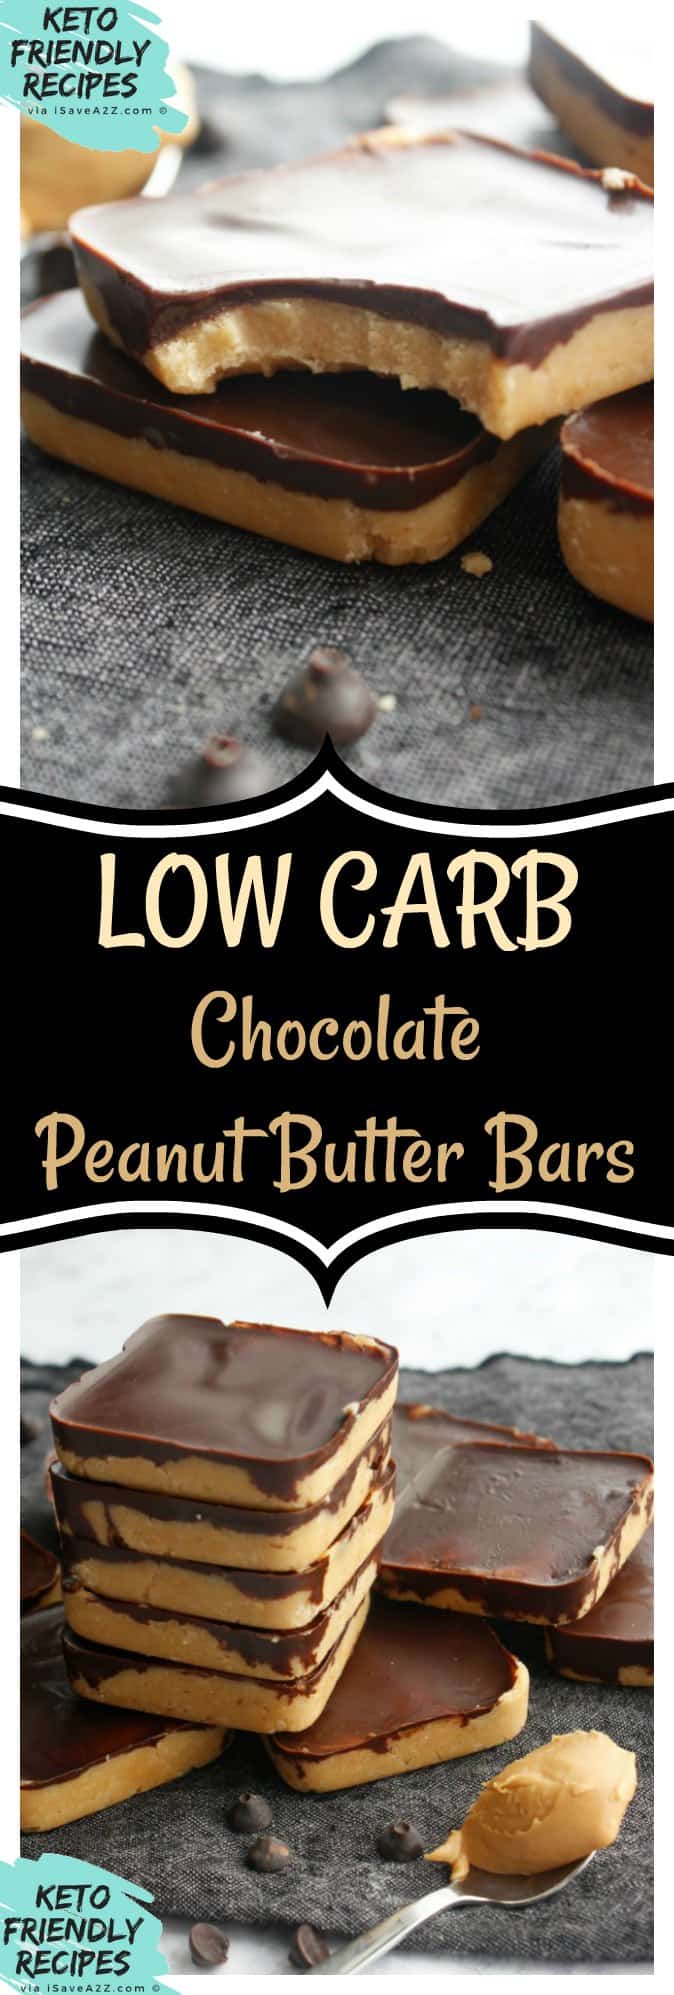 Low Carb Chocolate Peanut Butter Bars Recipe 